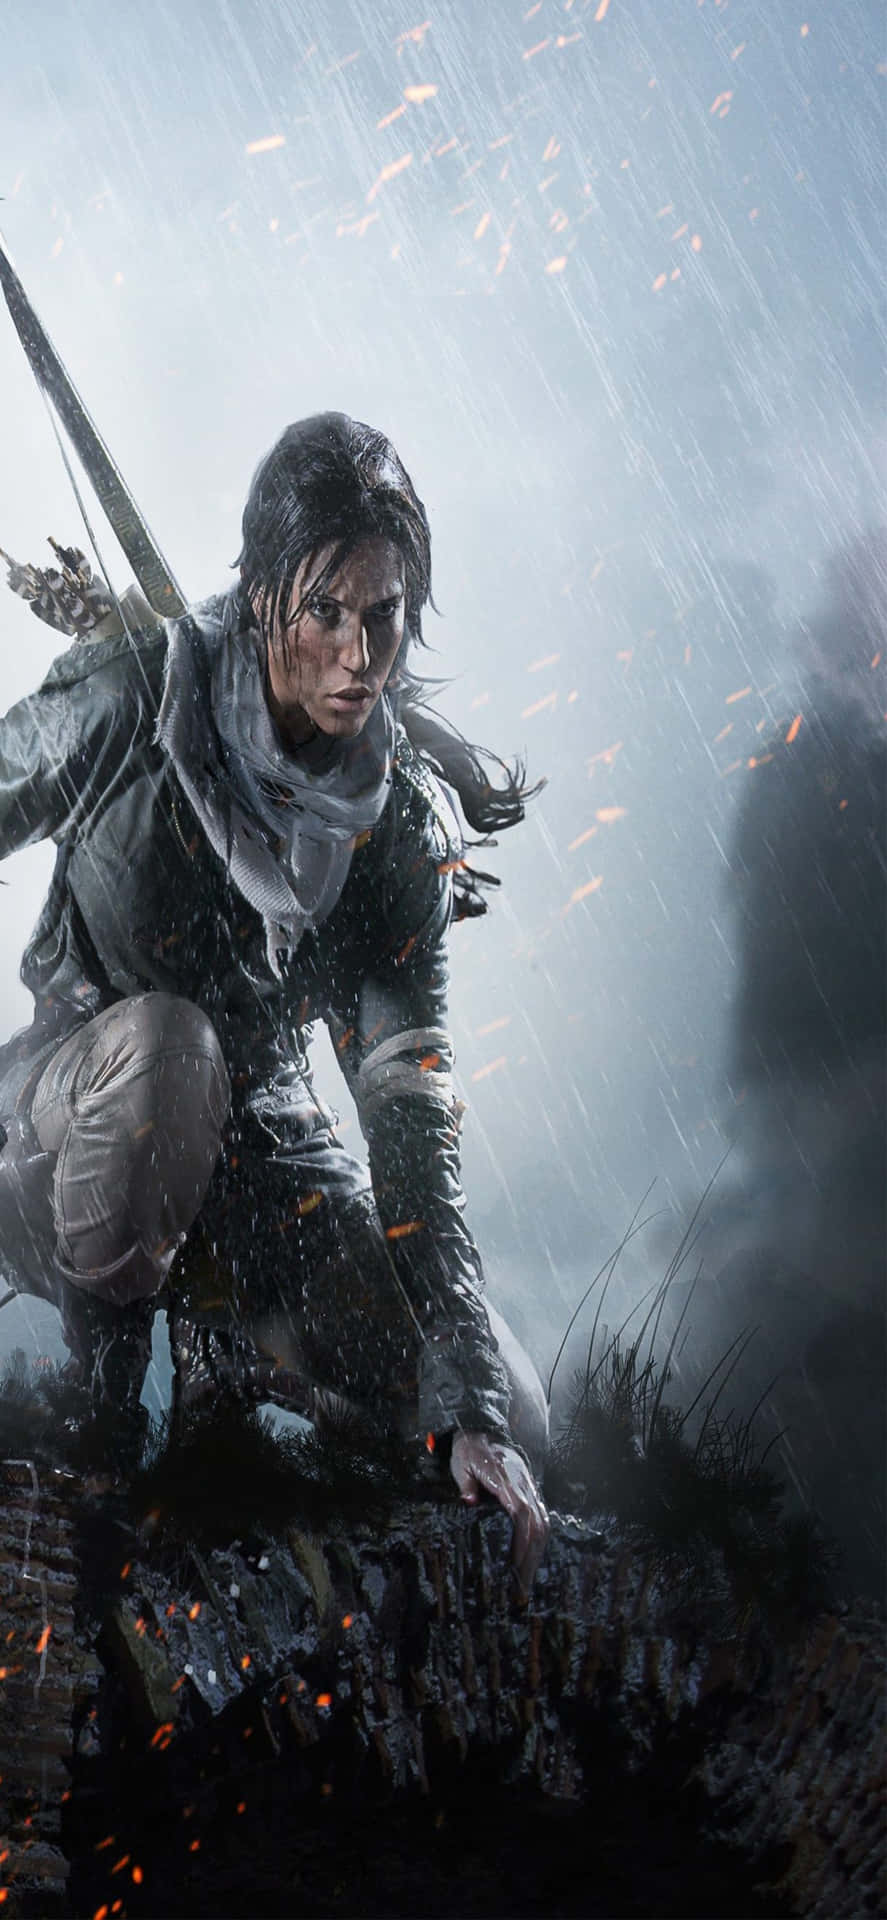 Action-packed adventure in Rise of the Tomb Raider